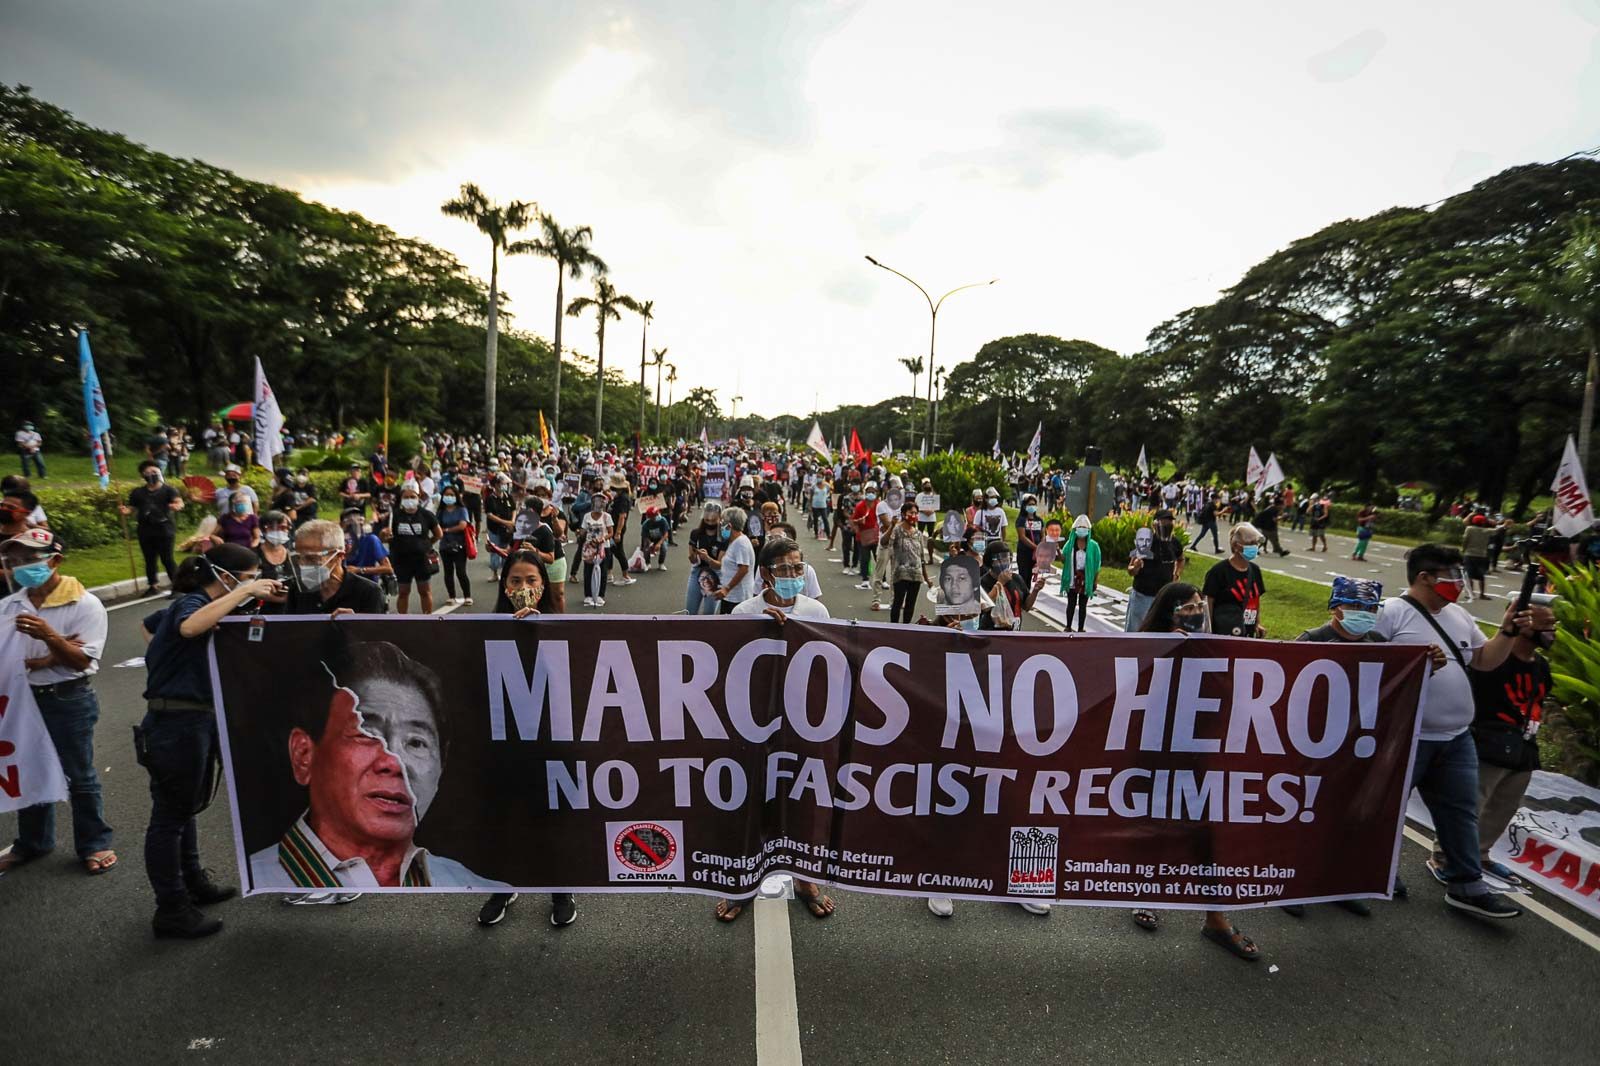 Groups warn of growing authoritarian rule on 48th Martial Law anniv